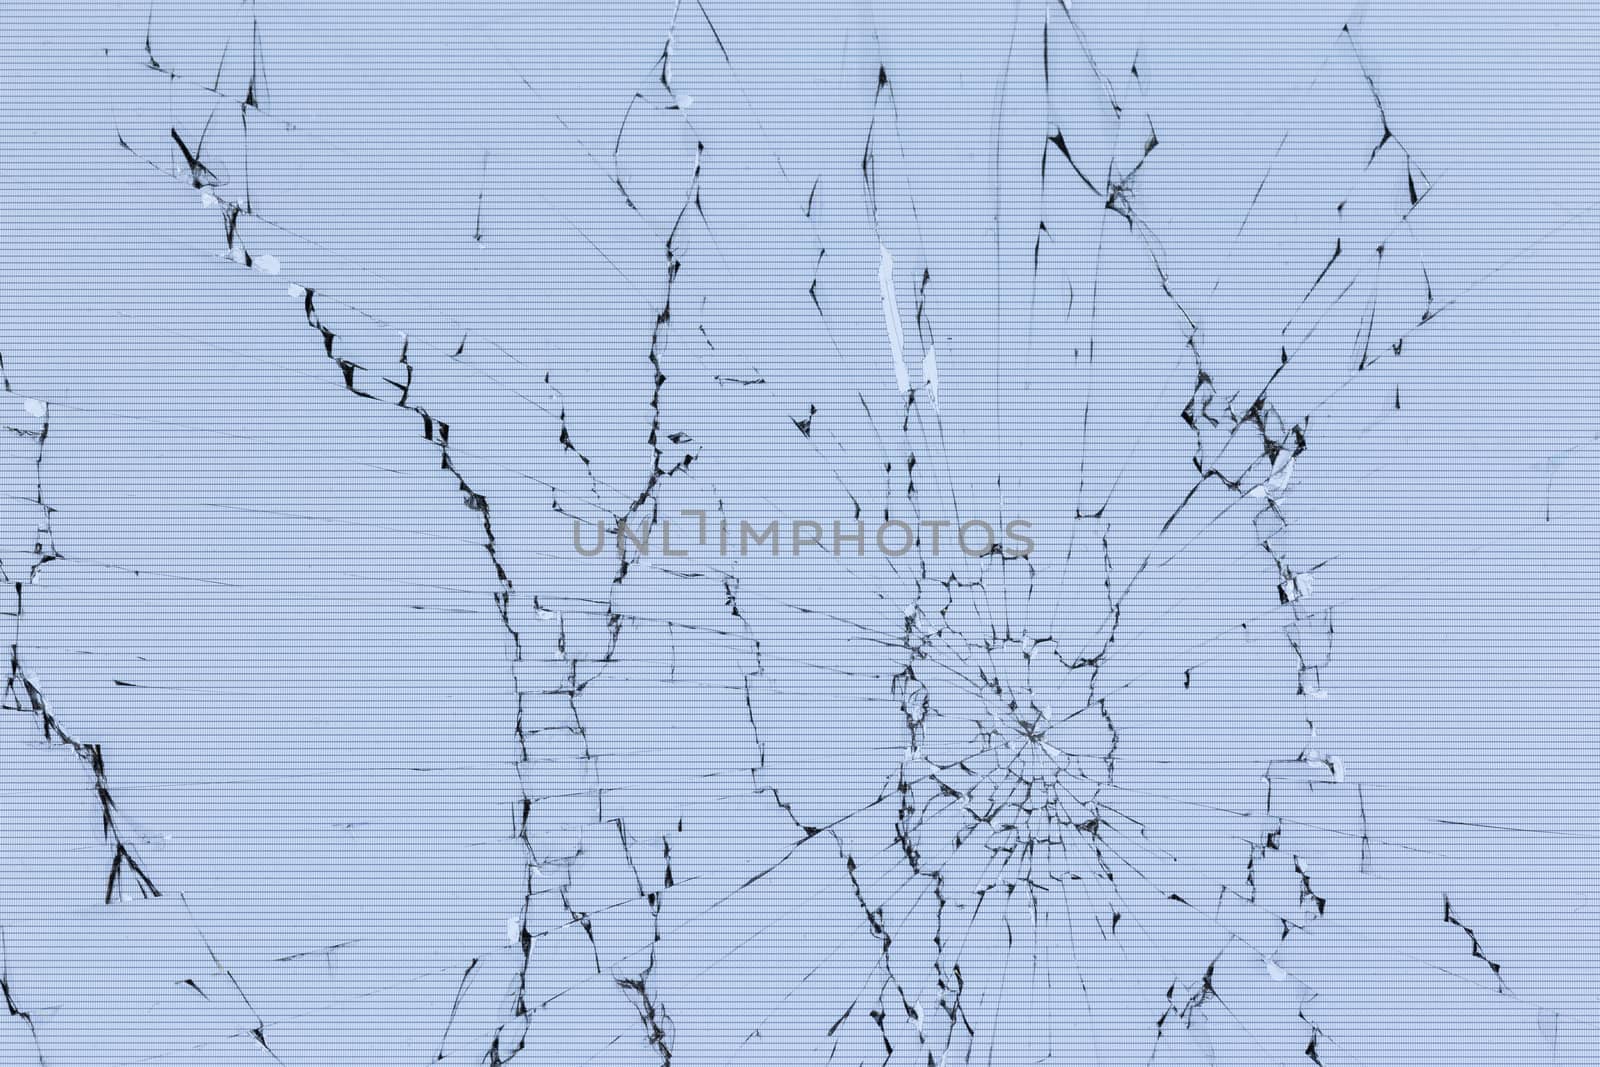 flat texture of cracked glass tft lcd screen with localized radial cracks.